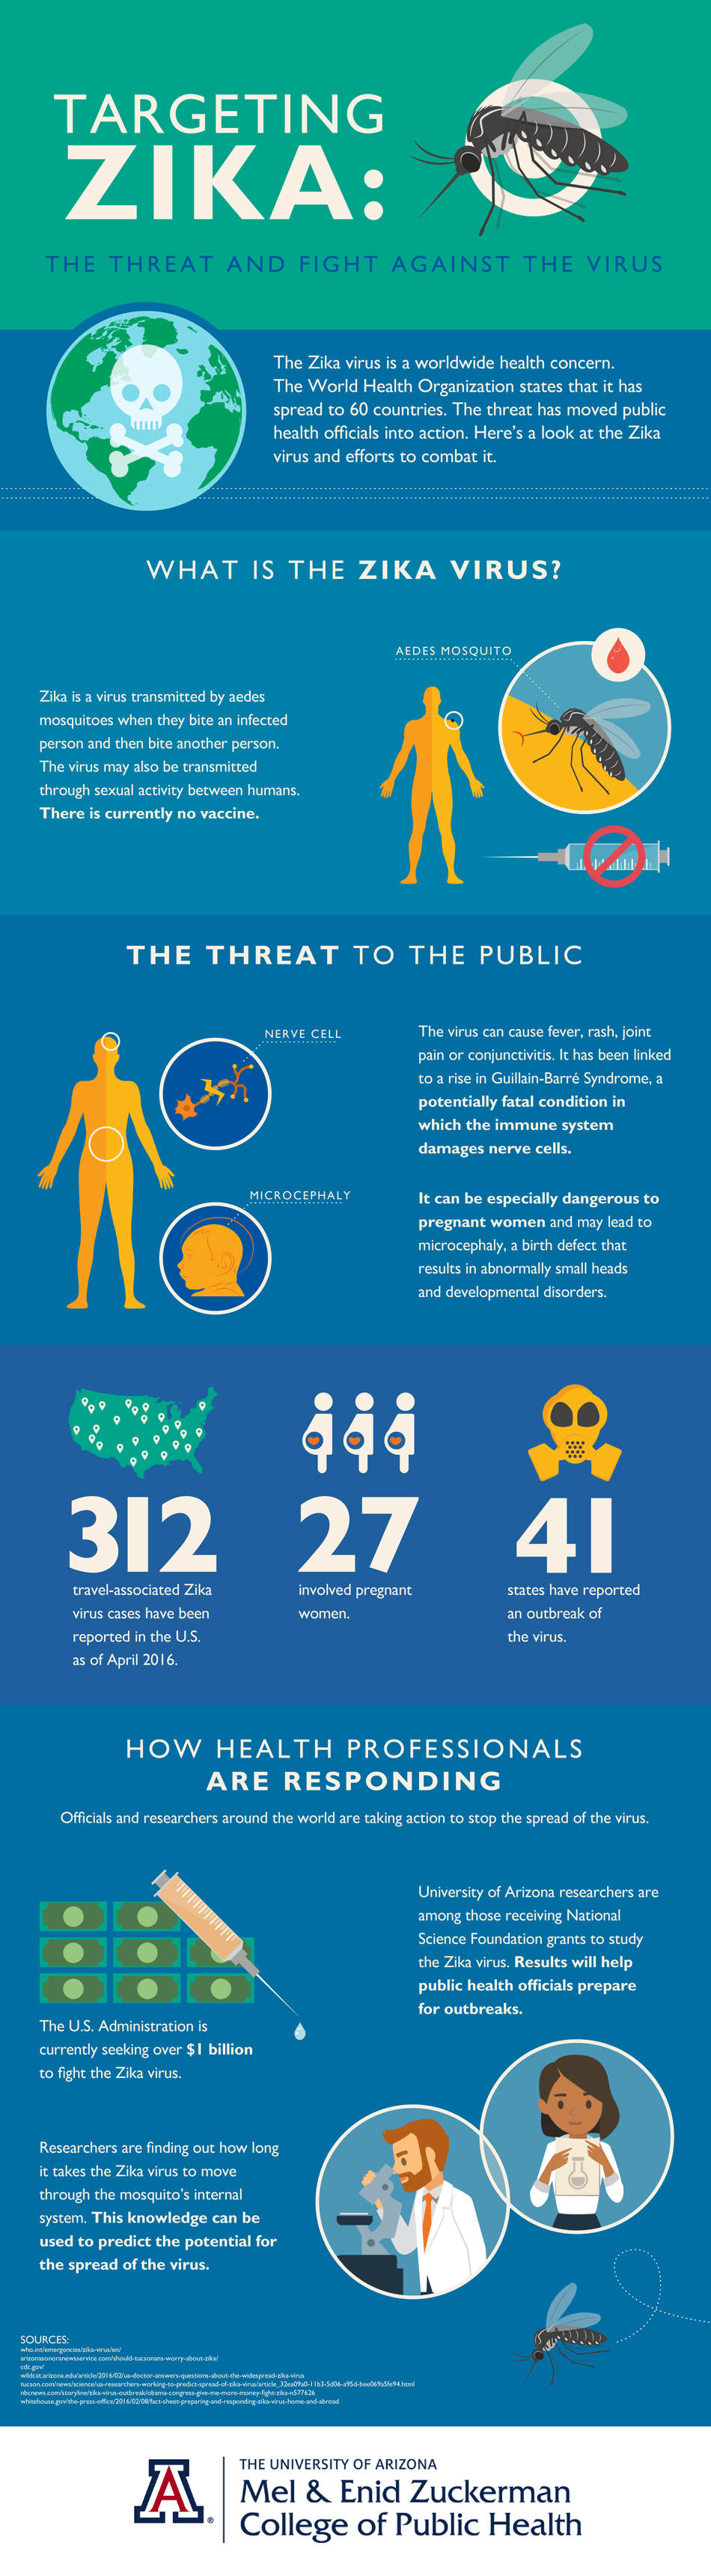 Infographic - Targeting Zika, The threat and fight against the virus